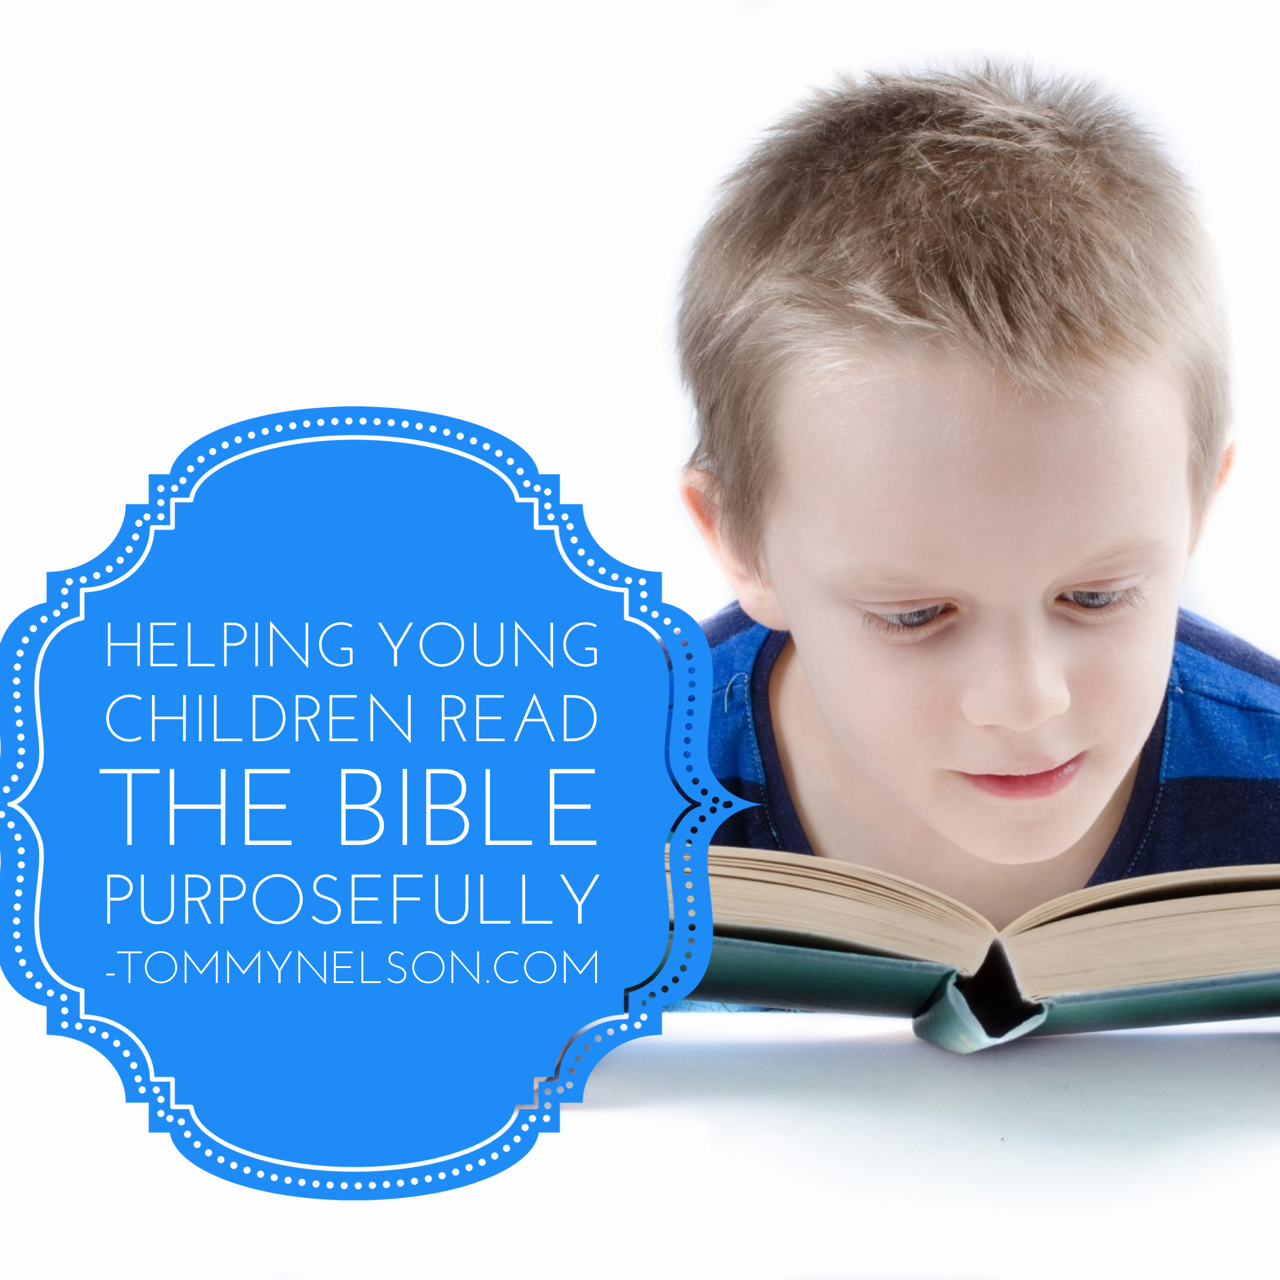 Helping Young Children Read the Bible Purposefully